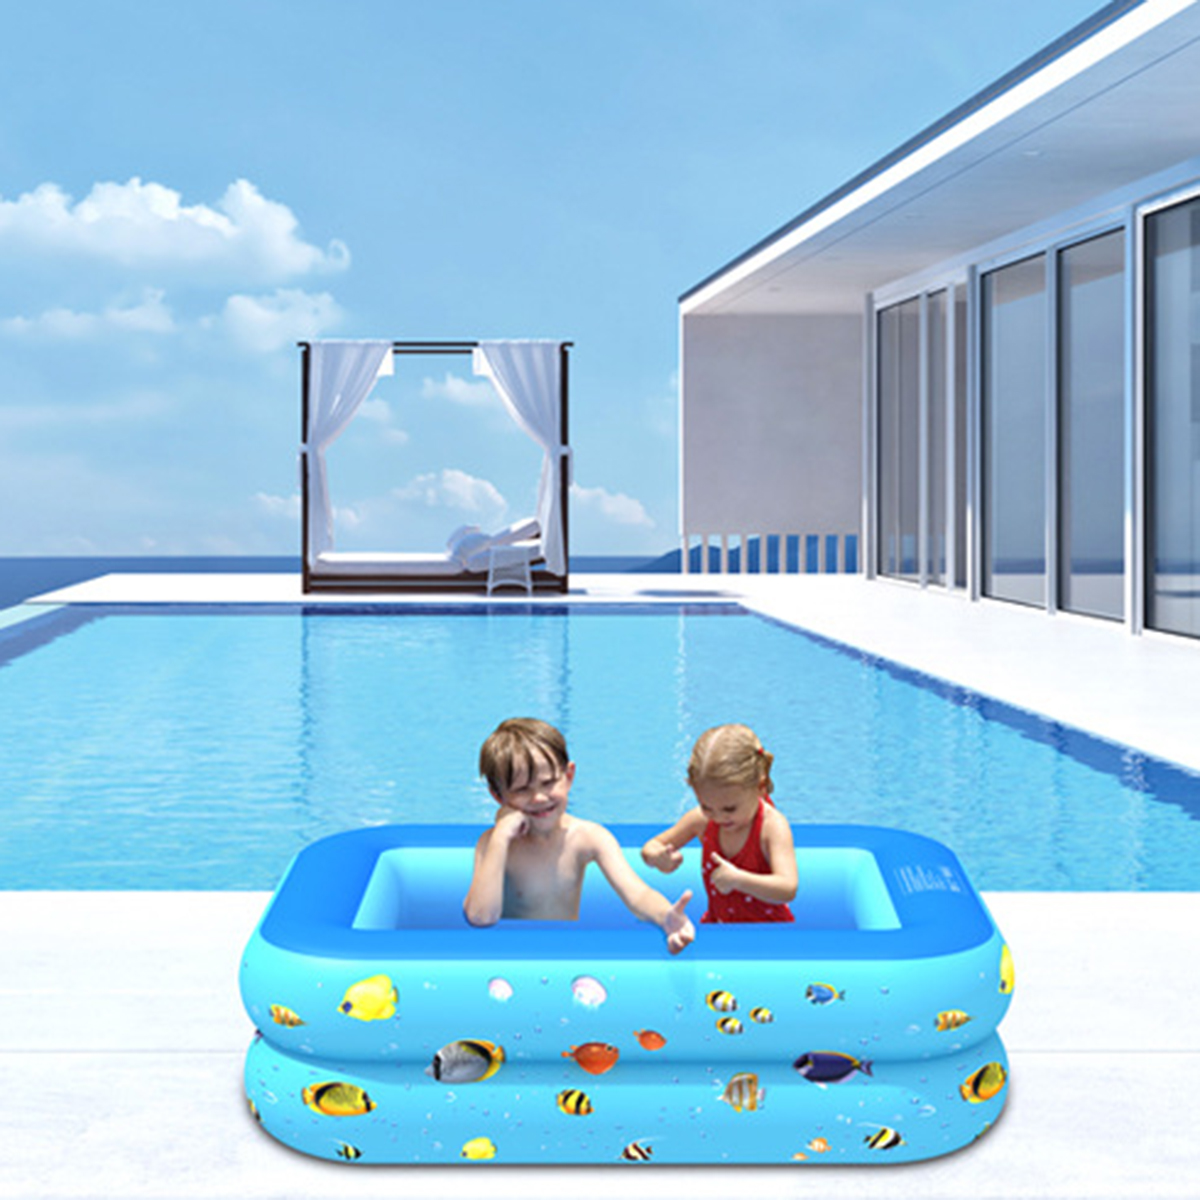 Inflatable-Swimming-Pool-Yard-Garden-Family-Kids-Play-Backyard-Blow-Up-Paddling-Pool-Bathing-Tub-Out-1689353-8